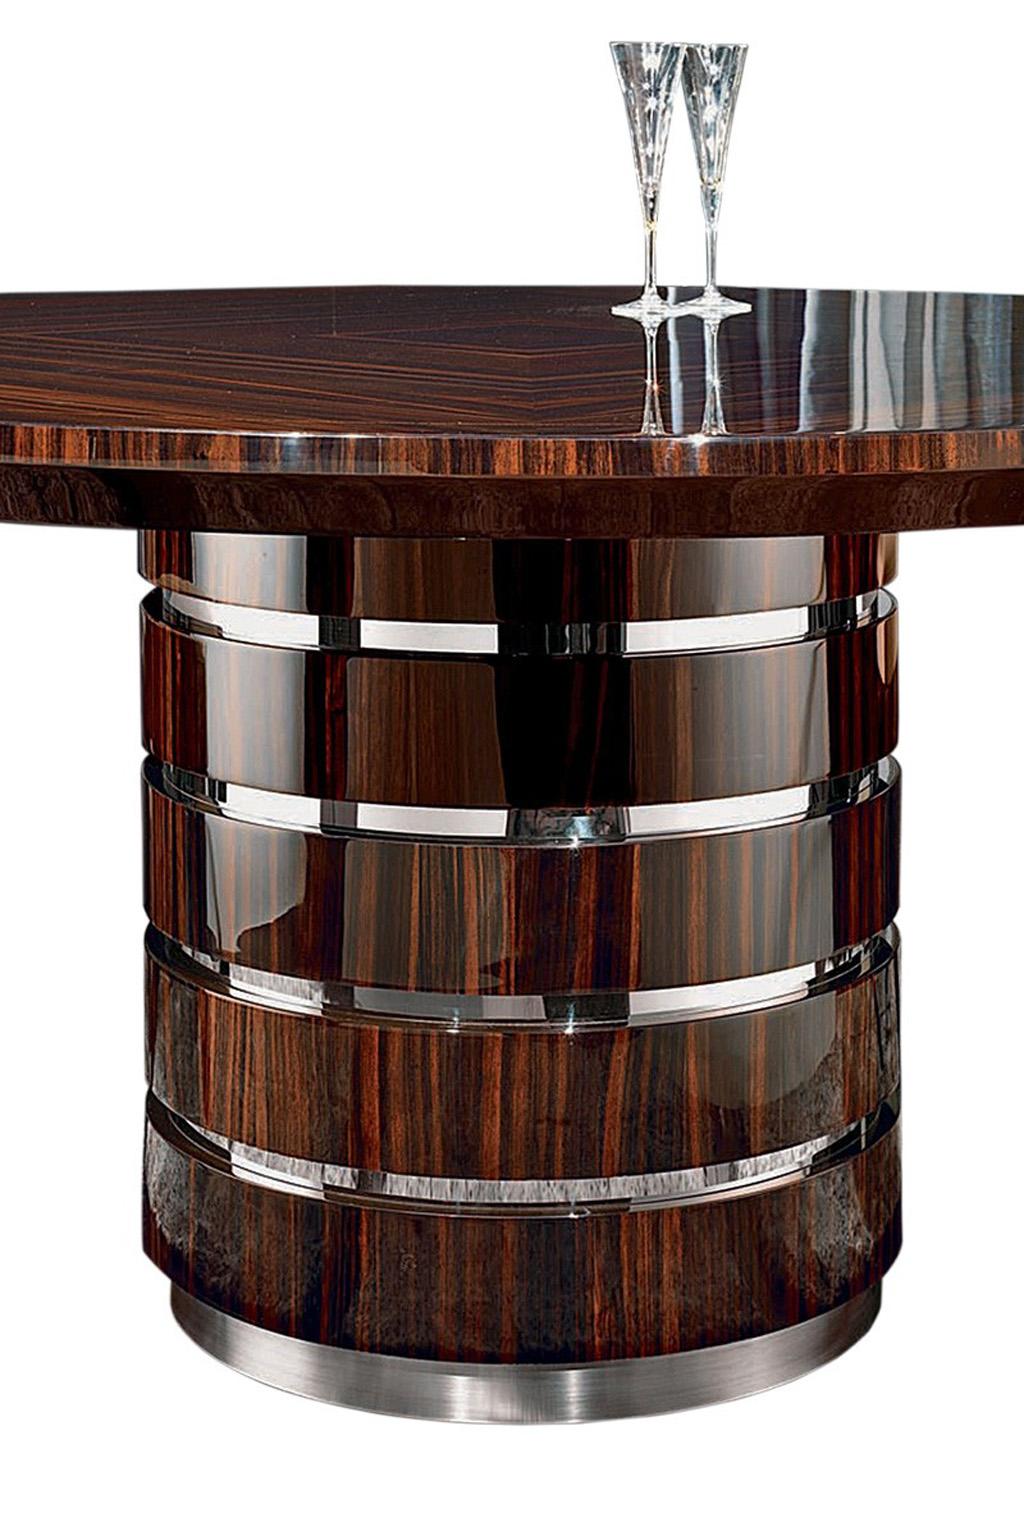 European Giorgio Collection Dining Round Table Ebony Macassar in High Gloss Finish For Sale